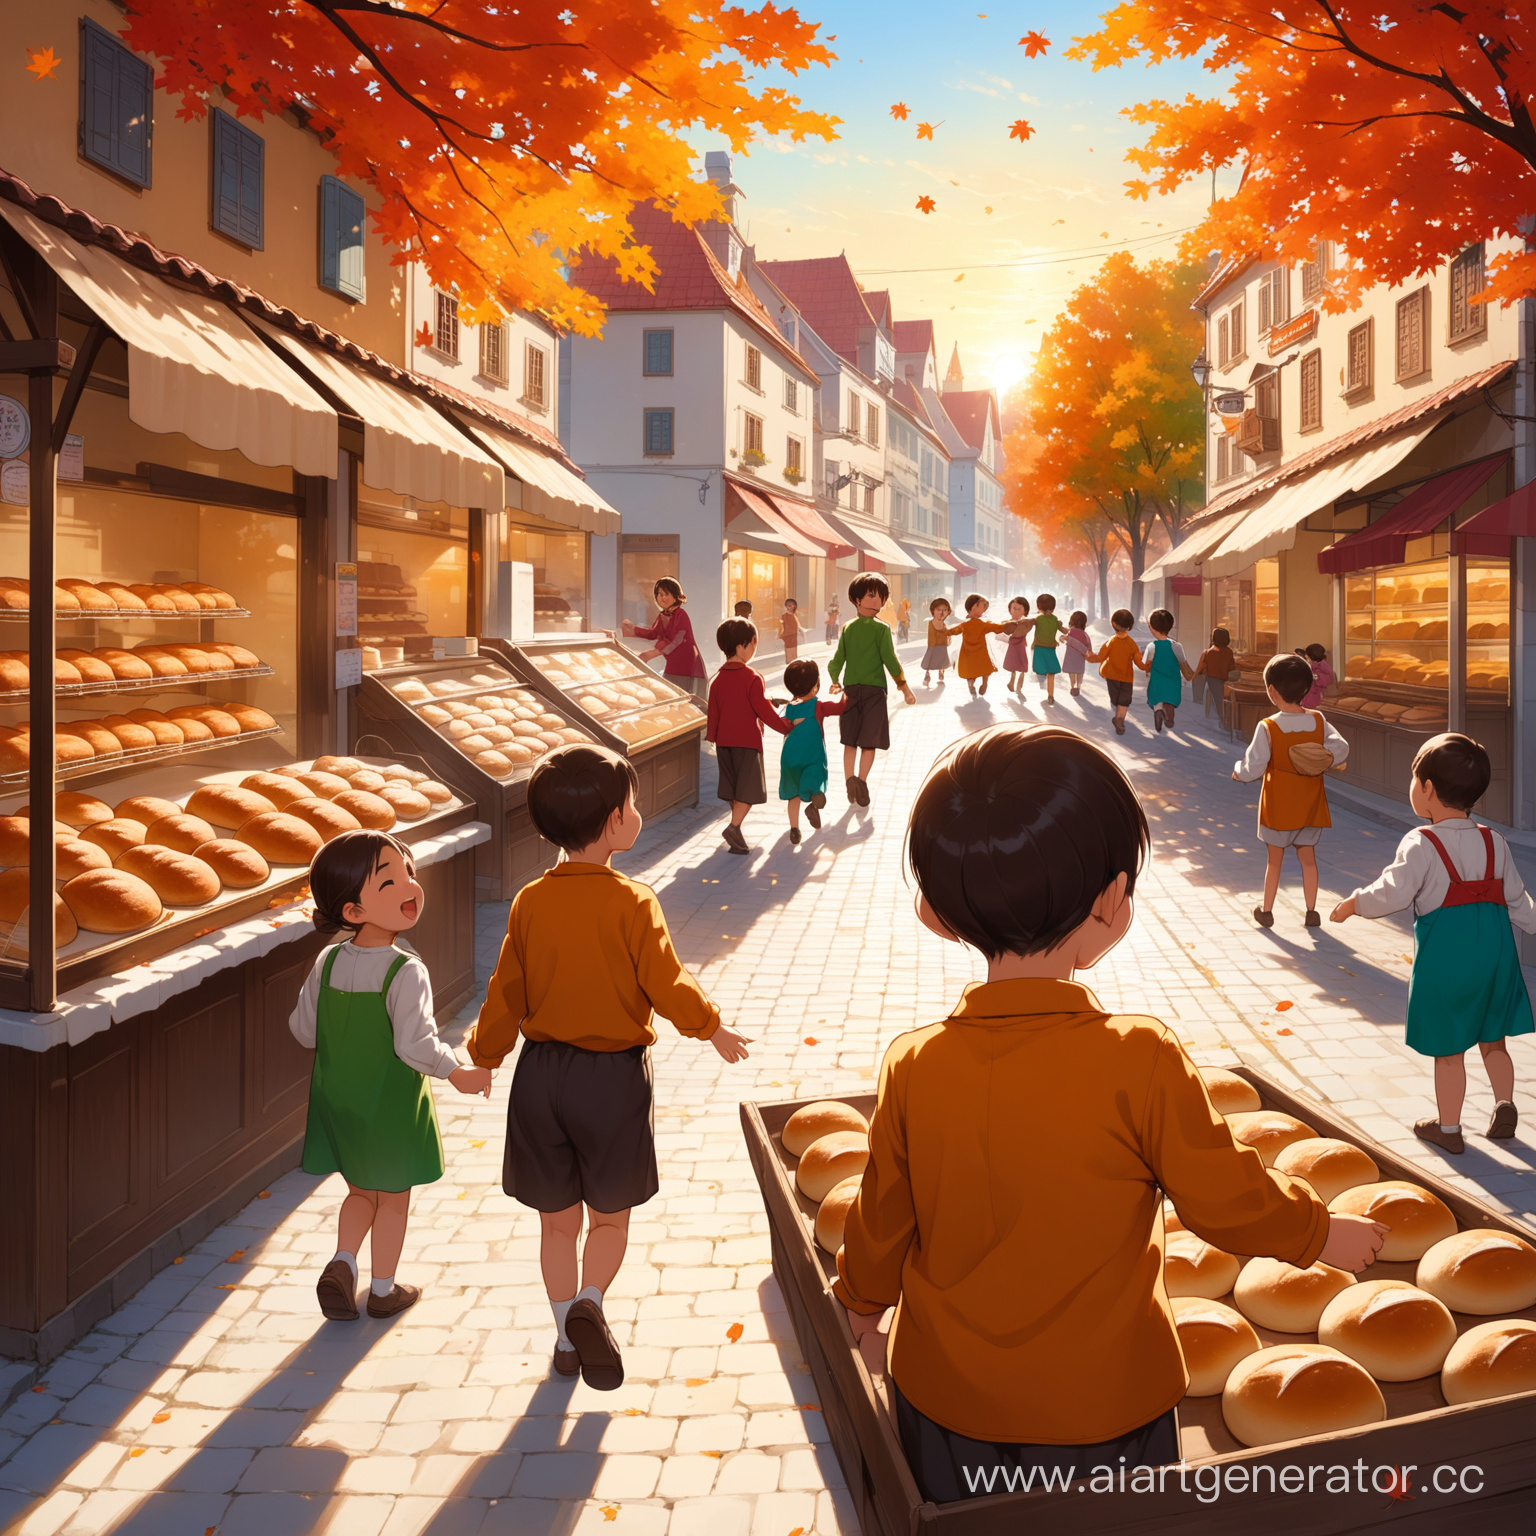 In the pretty town, the leaves danced gracefully in the autumn wind, making the streets colorful. The children played happily in the park, their laughter echoing through the cold air. The smell of freshly baked bread went pleasantly from the local bakery, making people buy it. The people in the town were busy with their daily routines and didn’t notice the beauty around them. The baker made the dough regularly, the shopkeepers greeted their customers kindly, making them feel welcome. As the sun began to set, the sky turned a beautiful shade of orange. The people in the town stopped what they were doing to admire the wonderful view. The children ran excitedly through the streets, their faces full of happiness.
